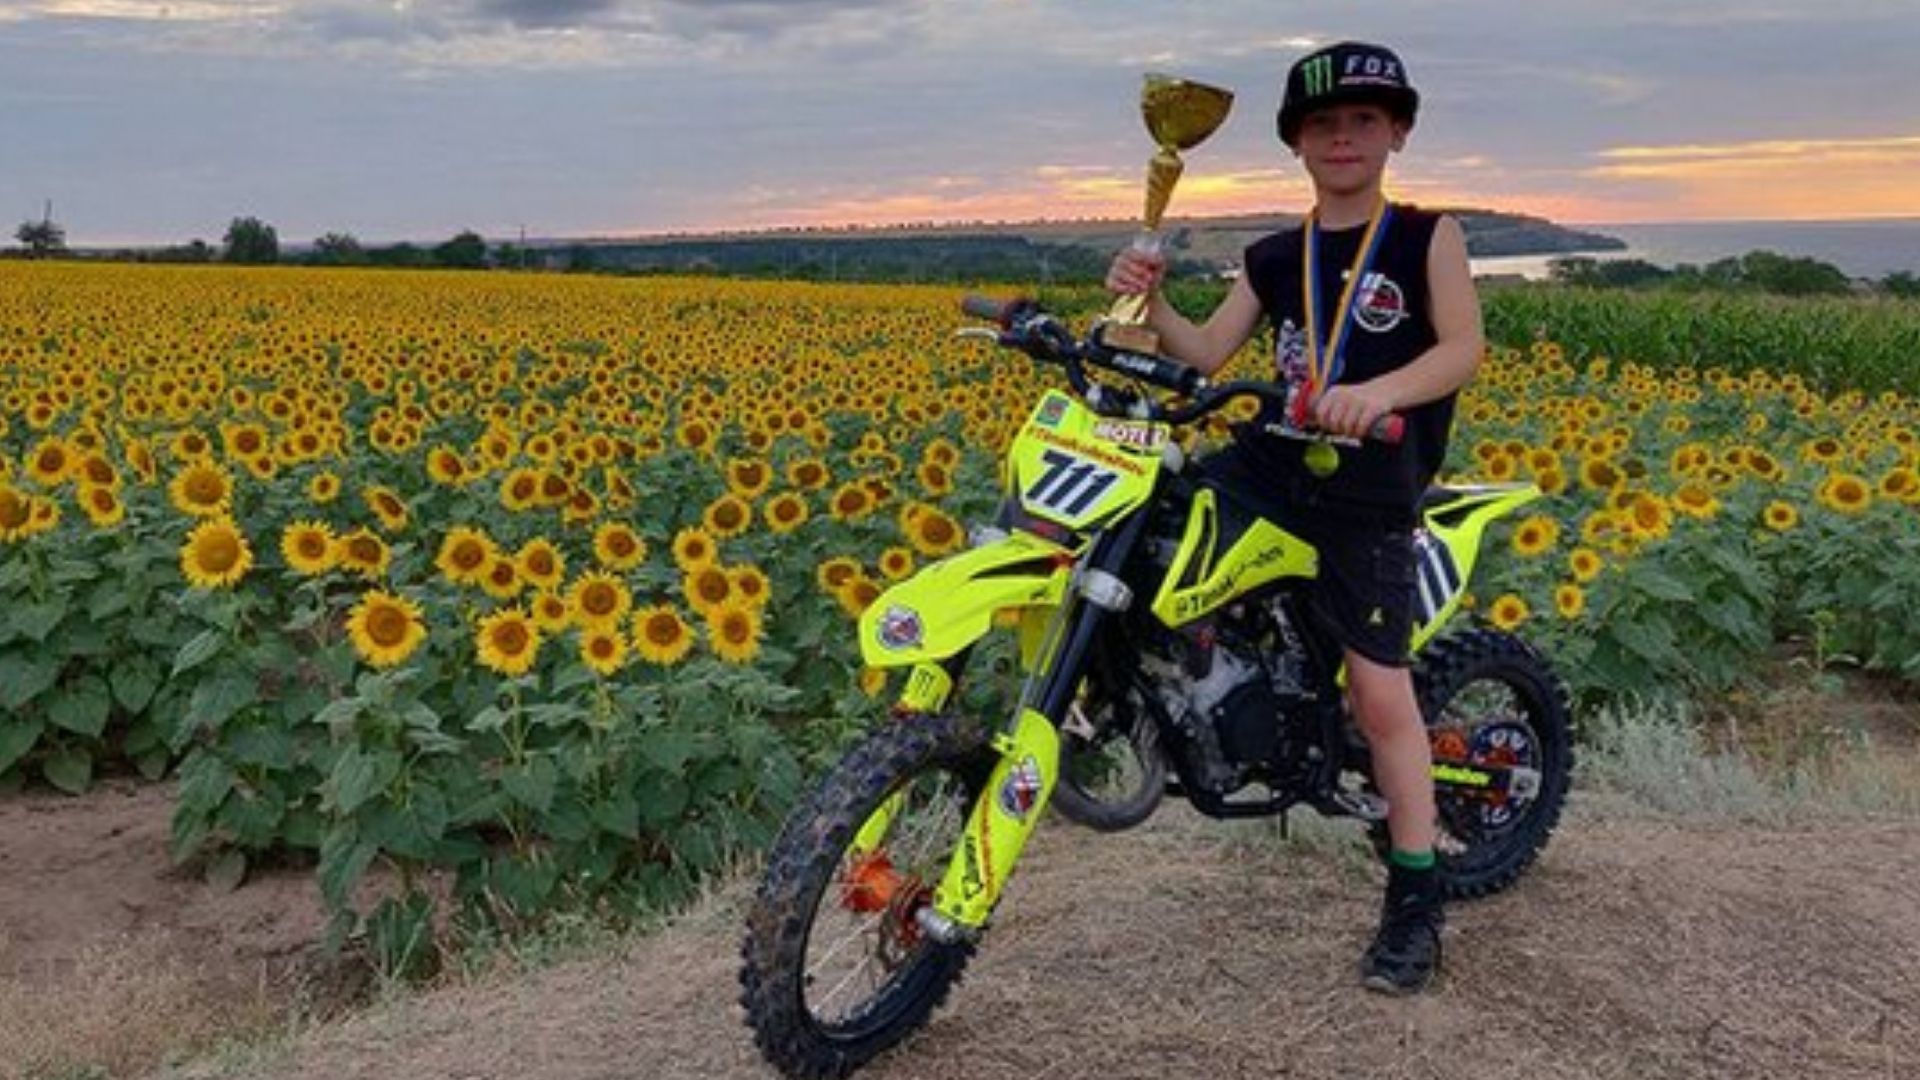 features, motorcycle, american, news, highlights, newsletter, muscle, handpicked, sports, client, classic, modern classic, europe, luxury, trucks, celebrity, off-road, german, motorcycle monday: tima kuleshov is a riding prodigy